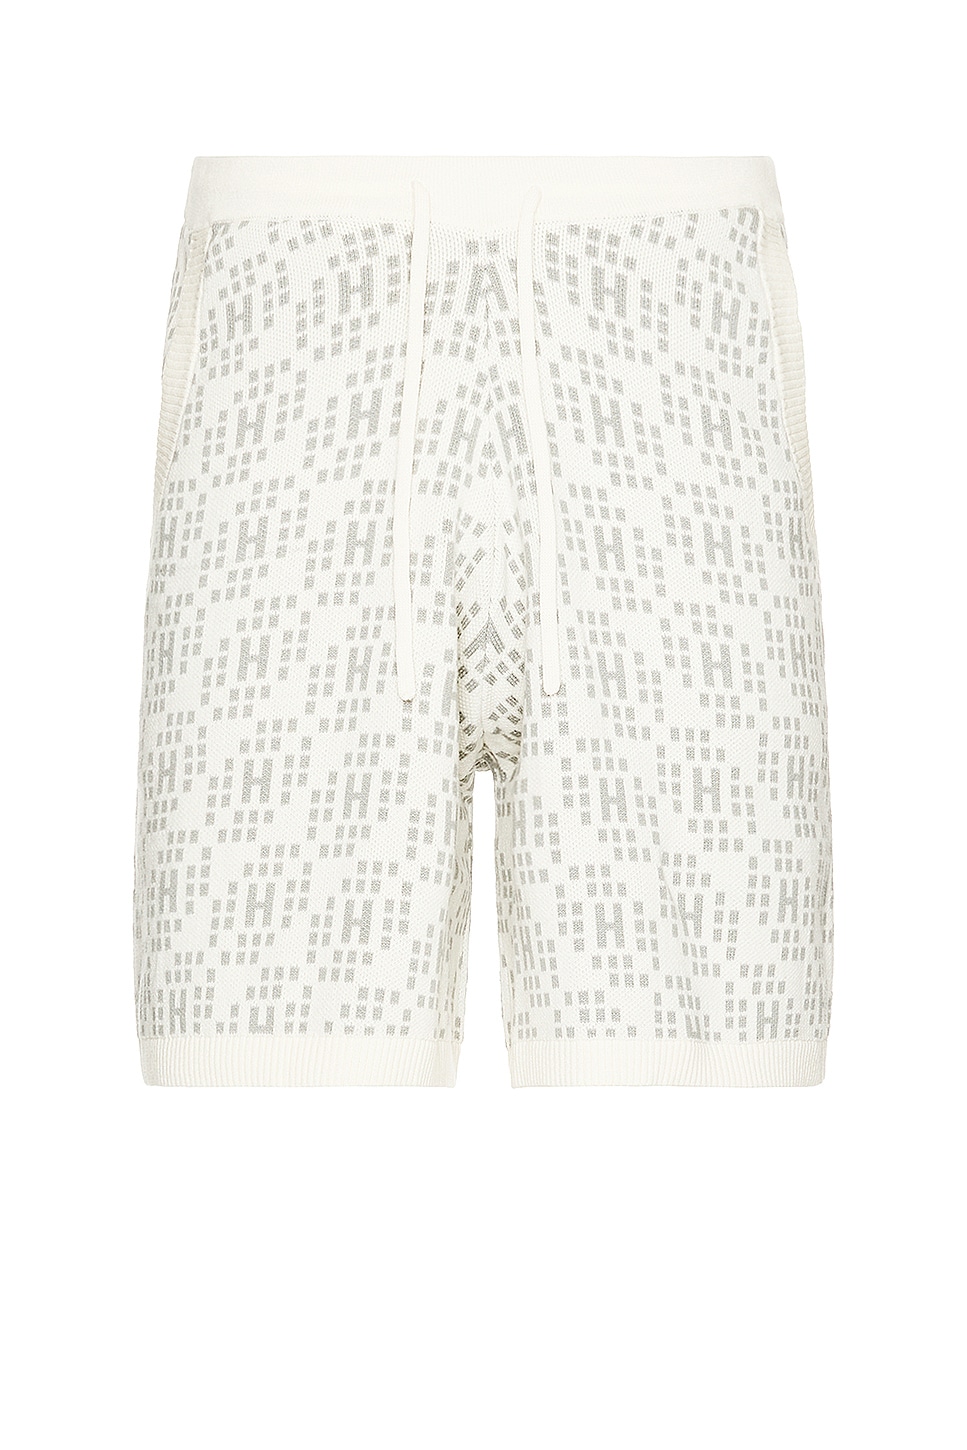 A-spring H Knit Short in Cream